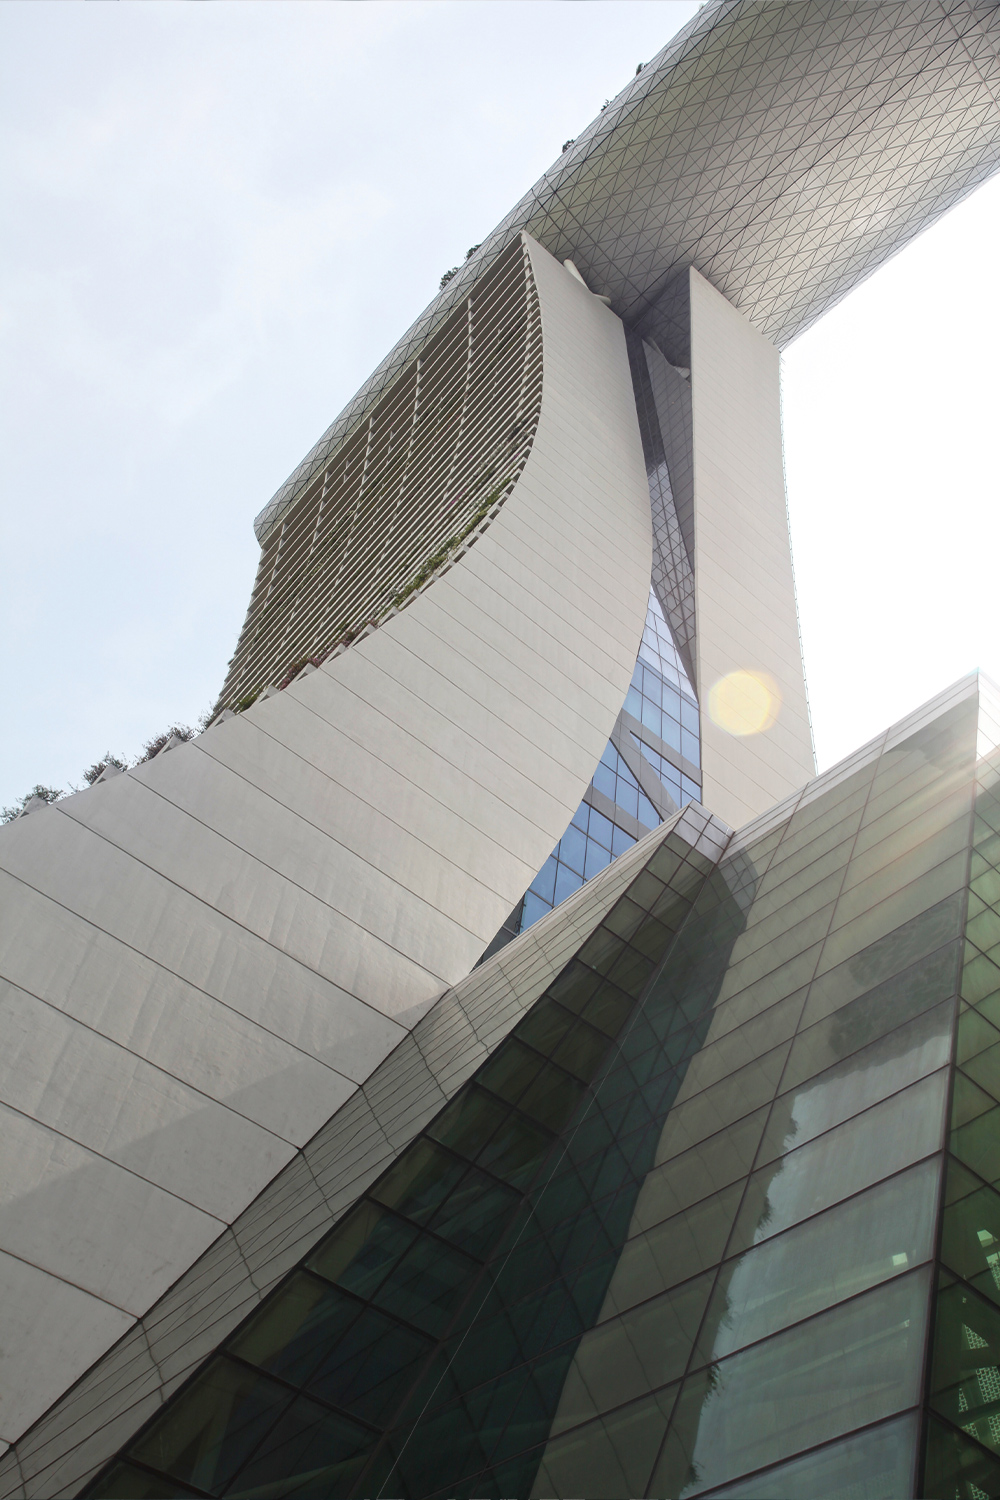 Photo looking up at Marina Bay Sands with light coming through